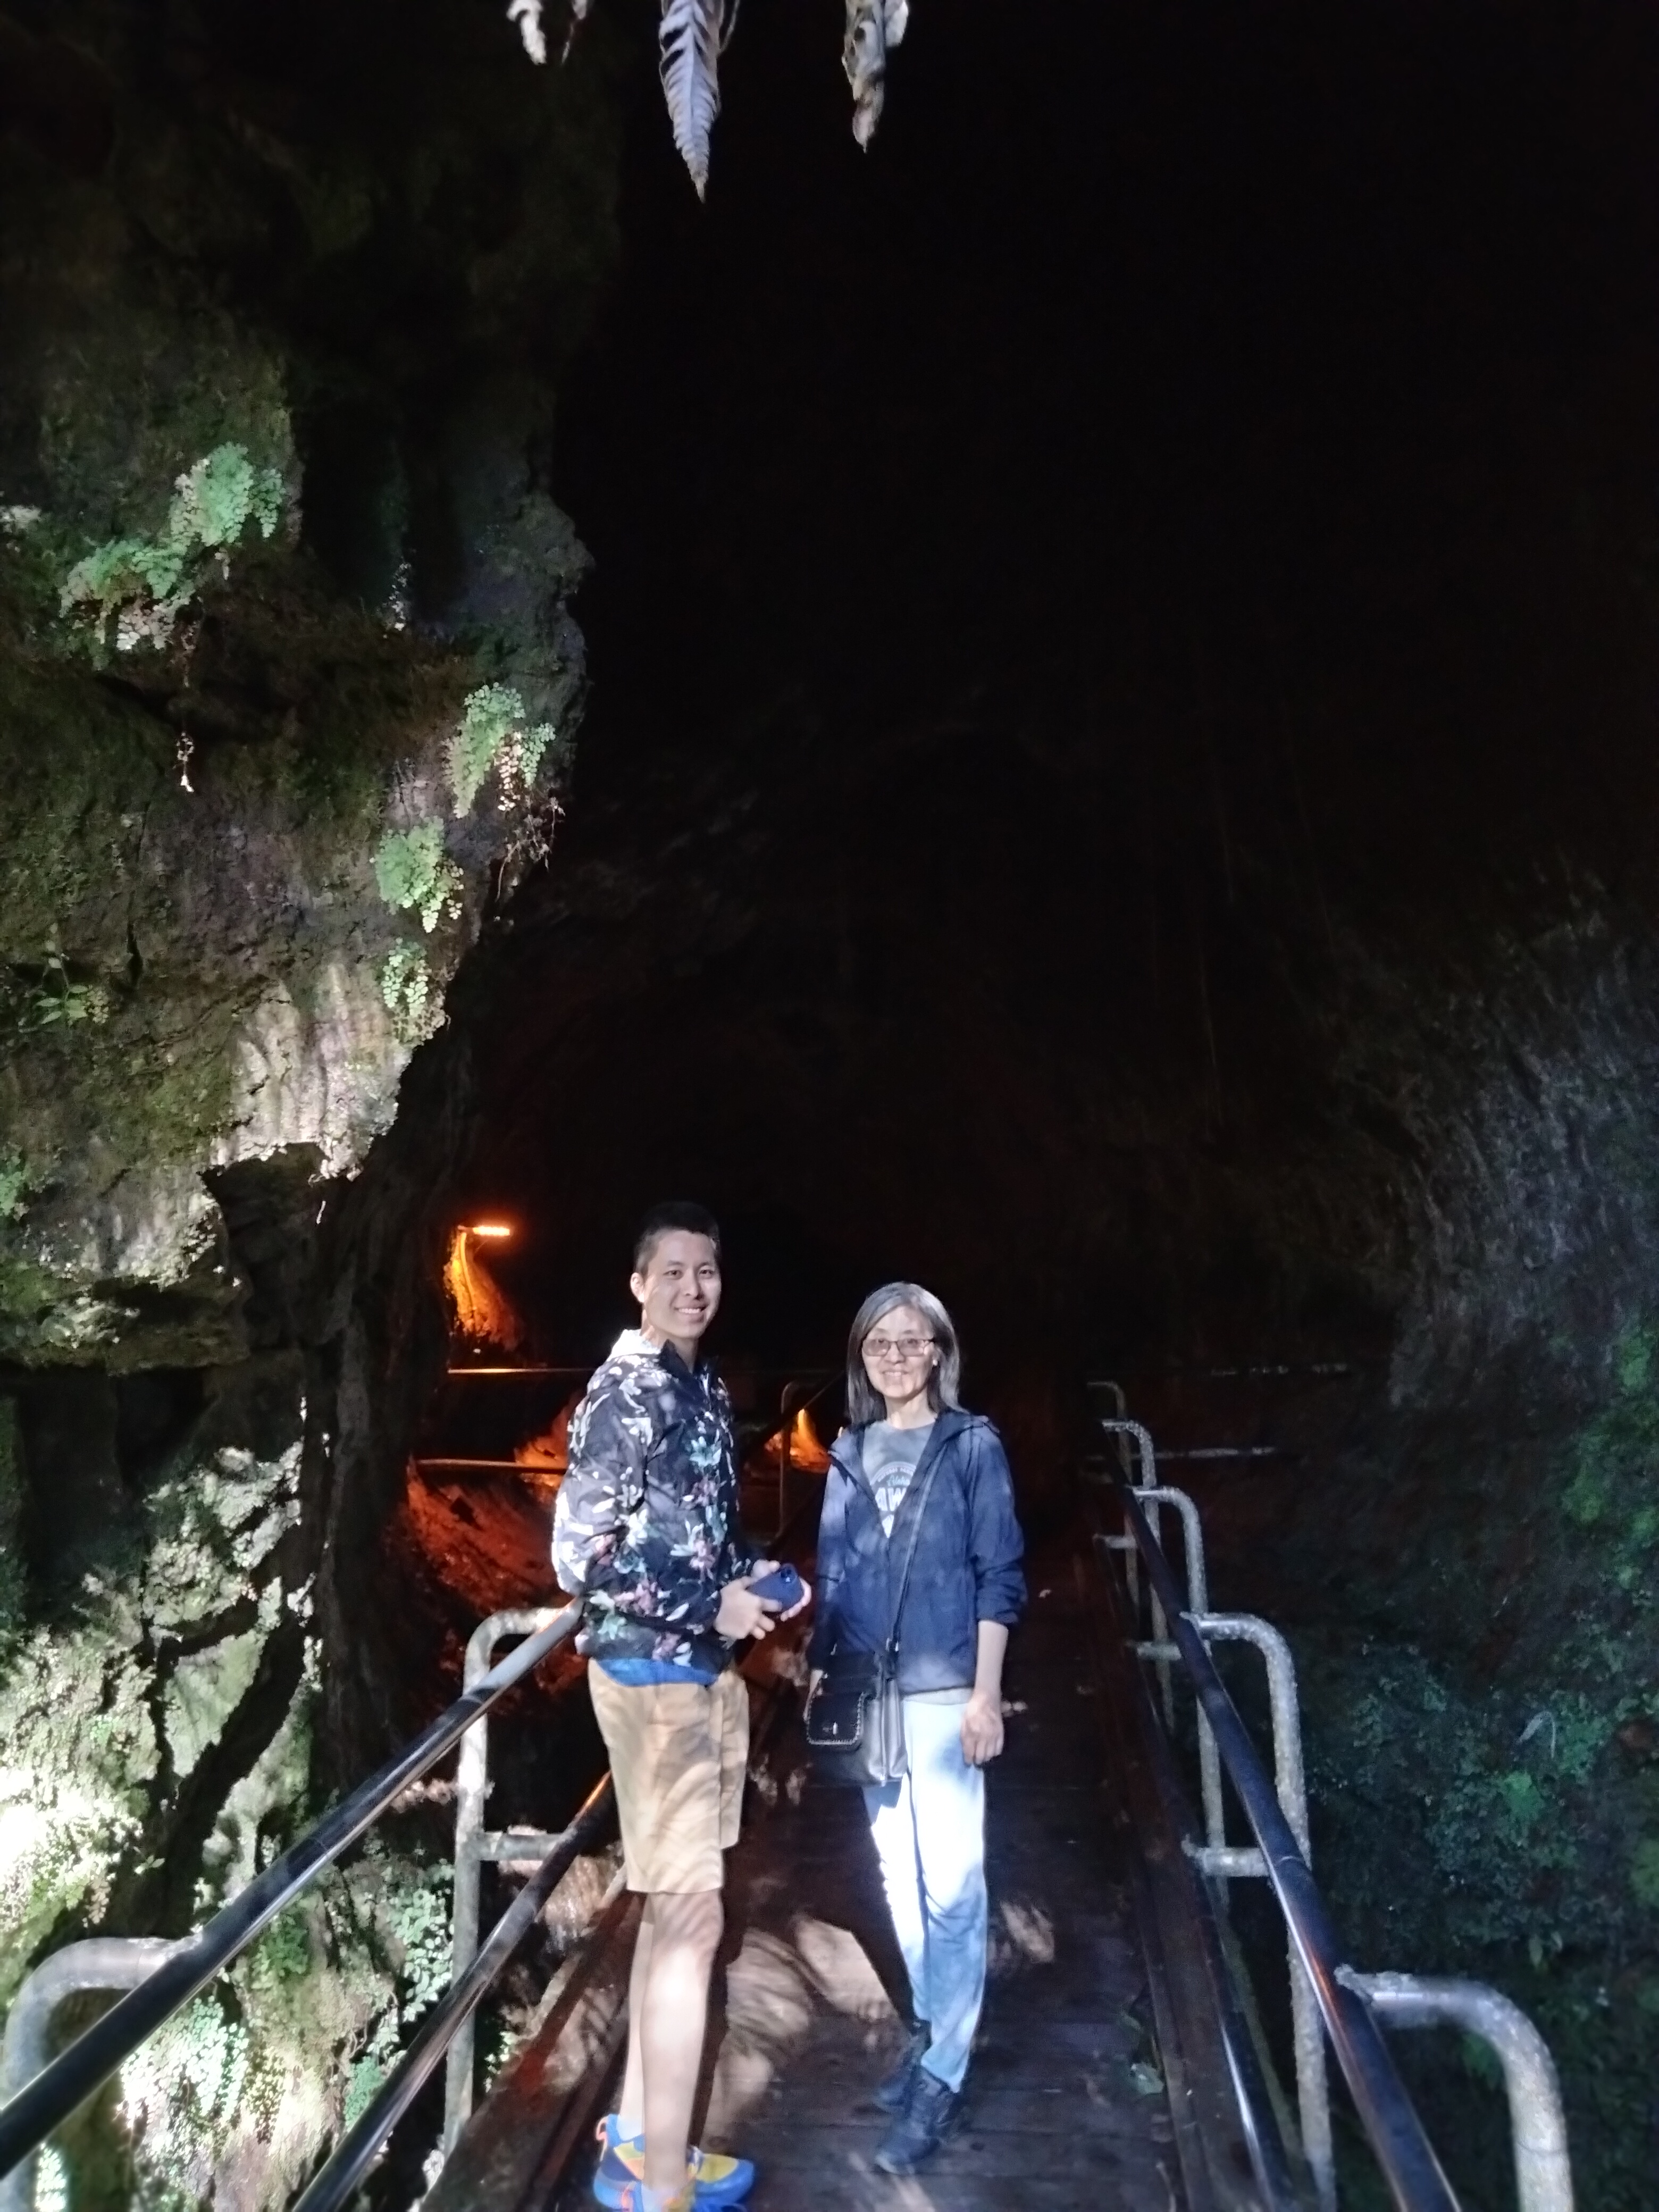 One end of the Thurston Lava tube